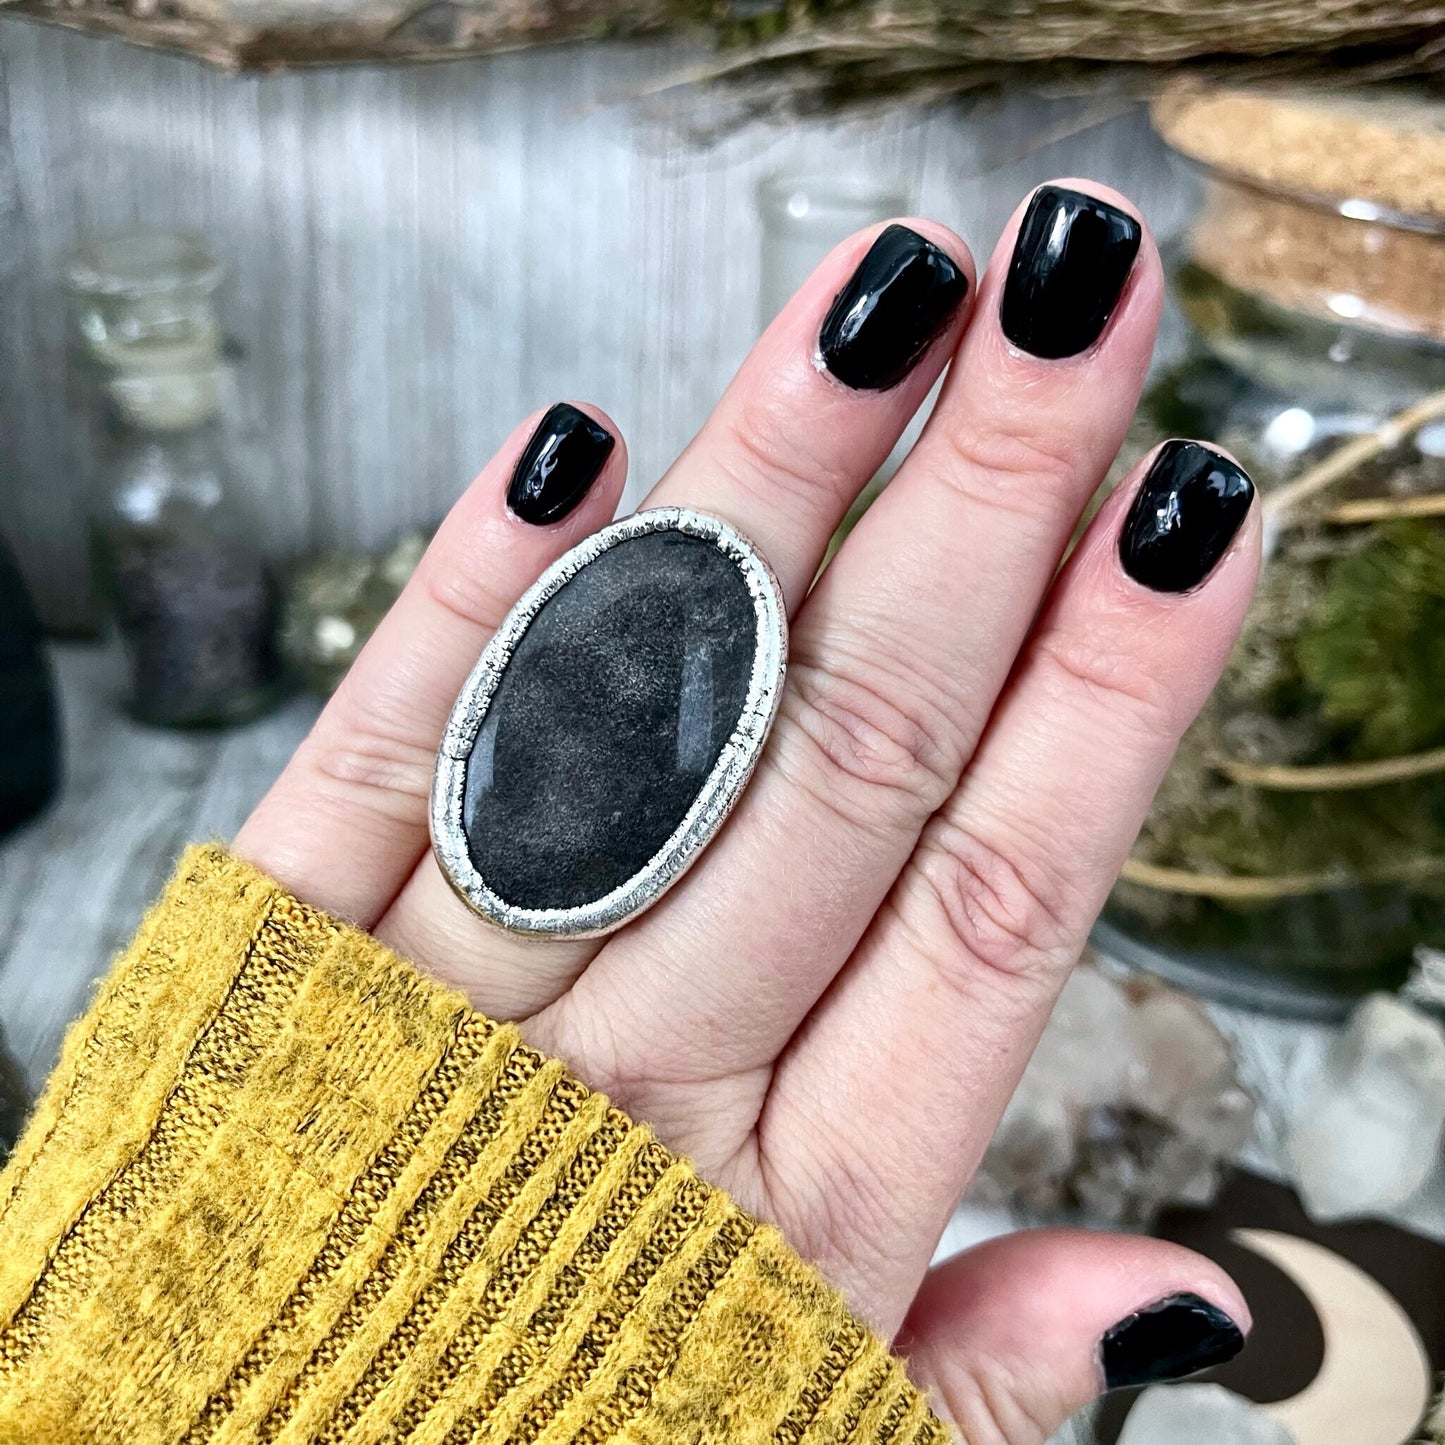 Size 6.5 Silver Sheen Obsidian Statement Ring in fine Silver / Foxlark Collection - One of a Kind